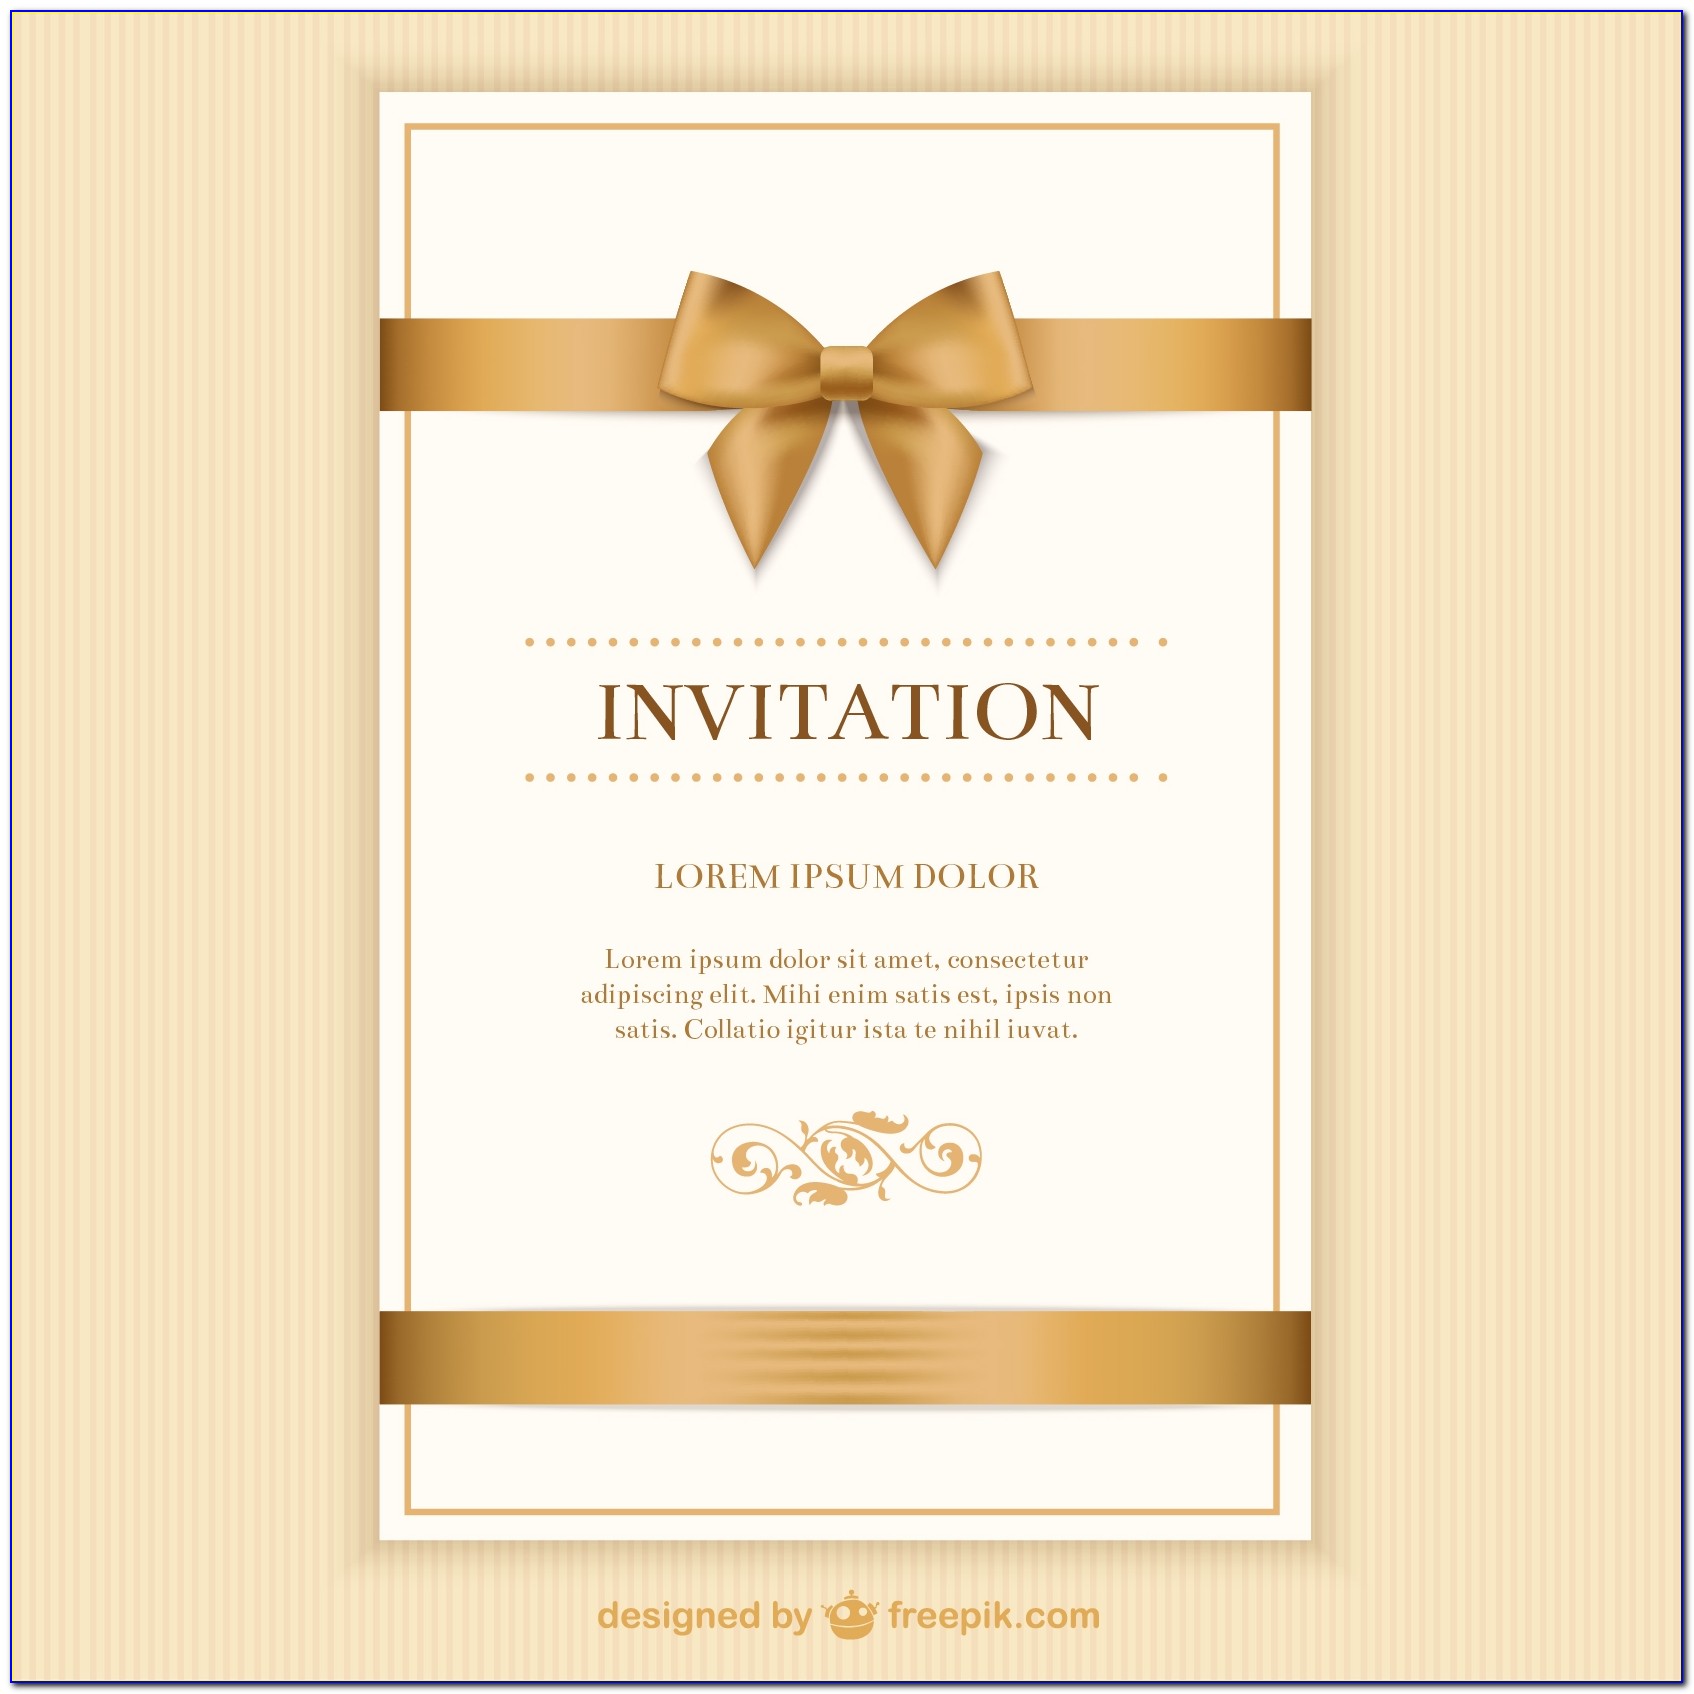 Invitation Images Free Download